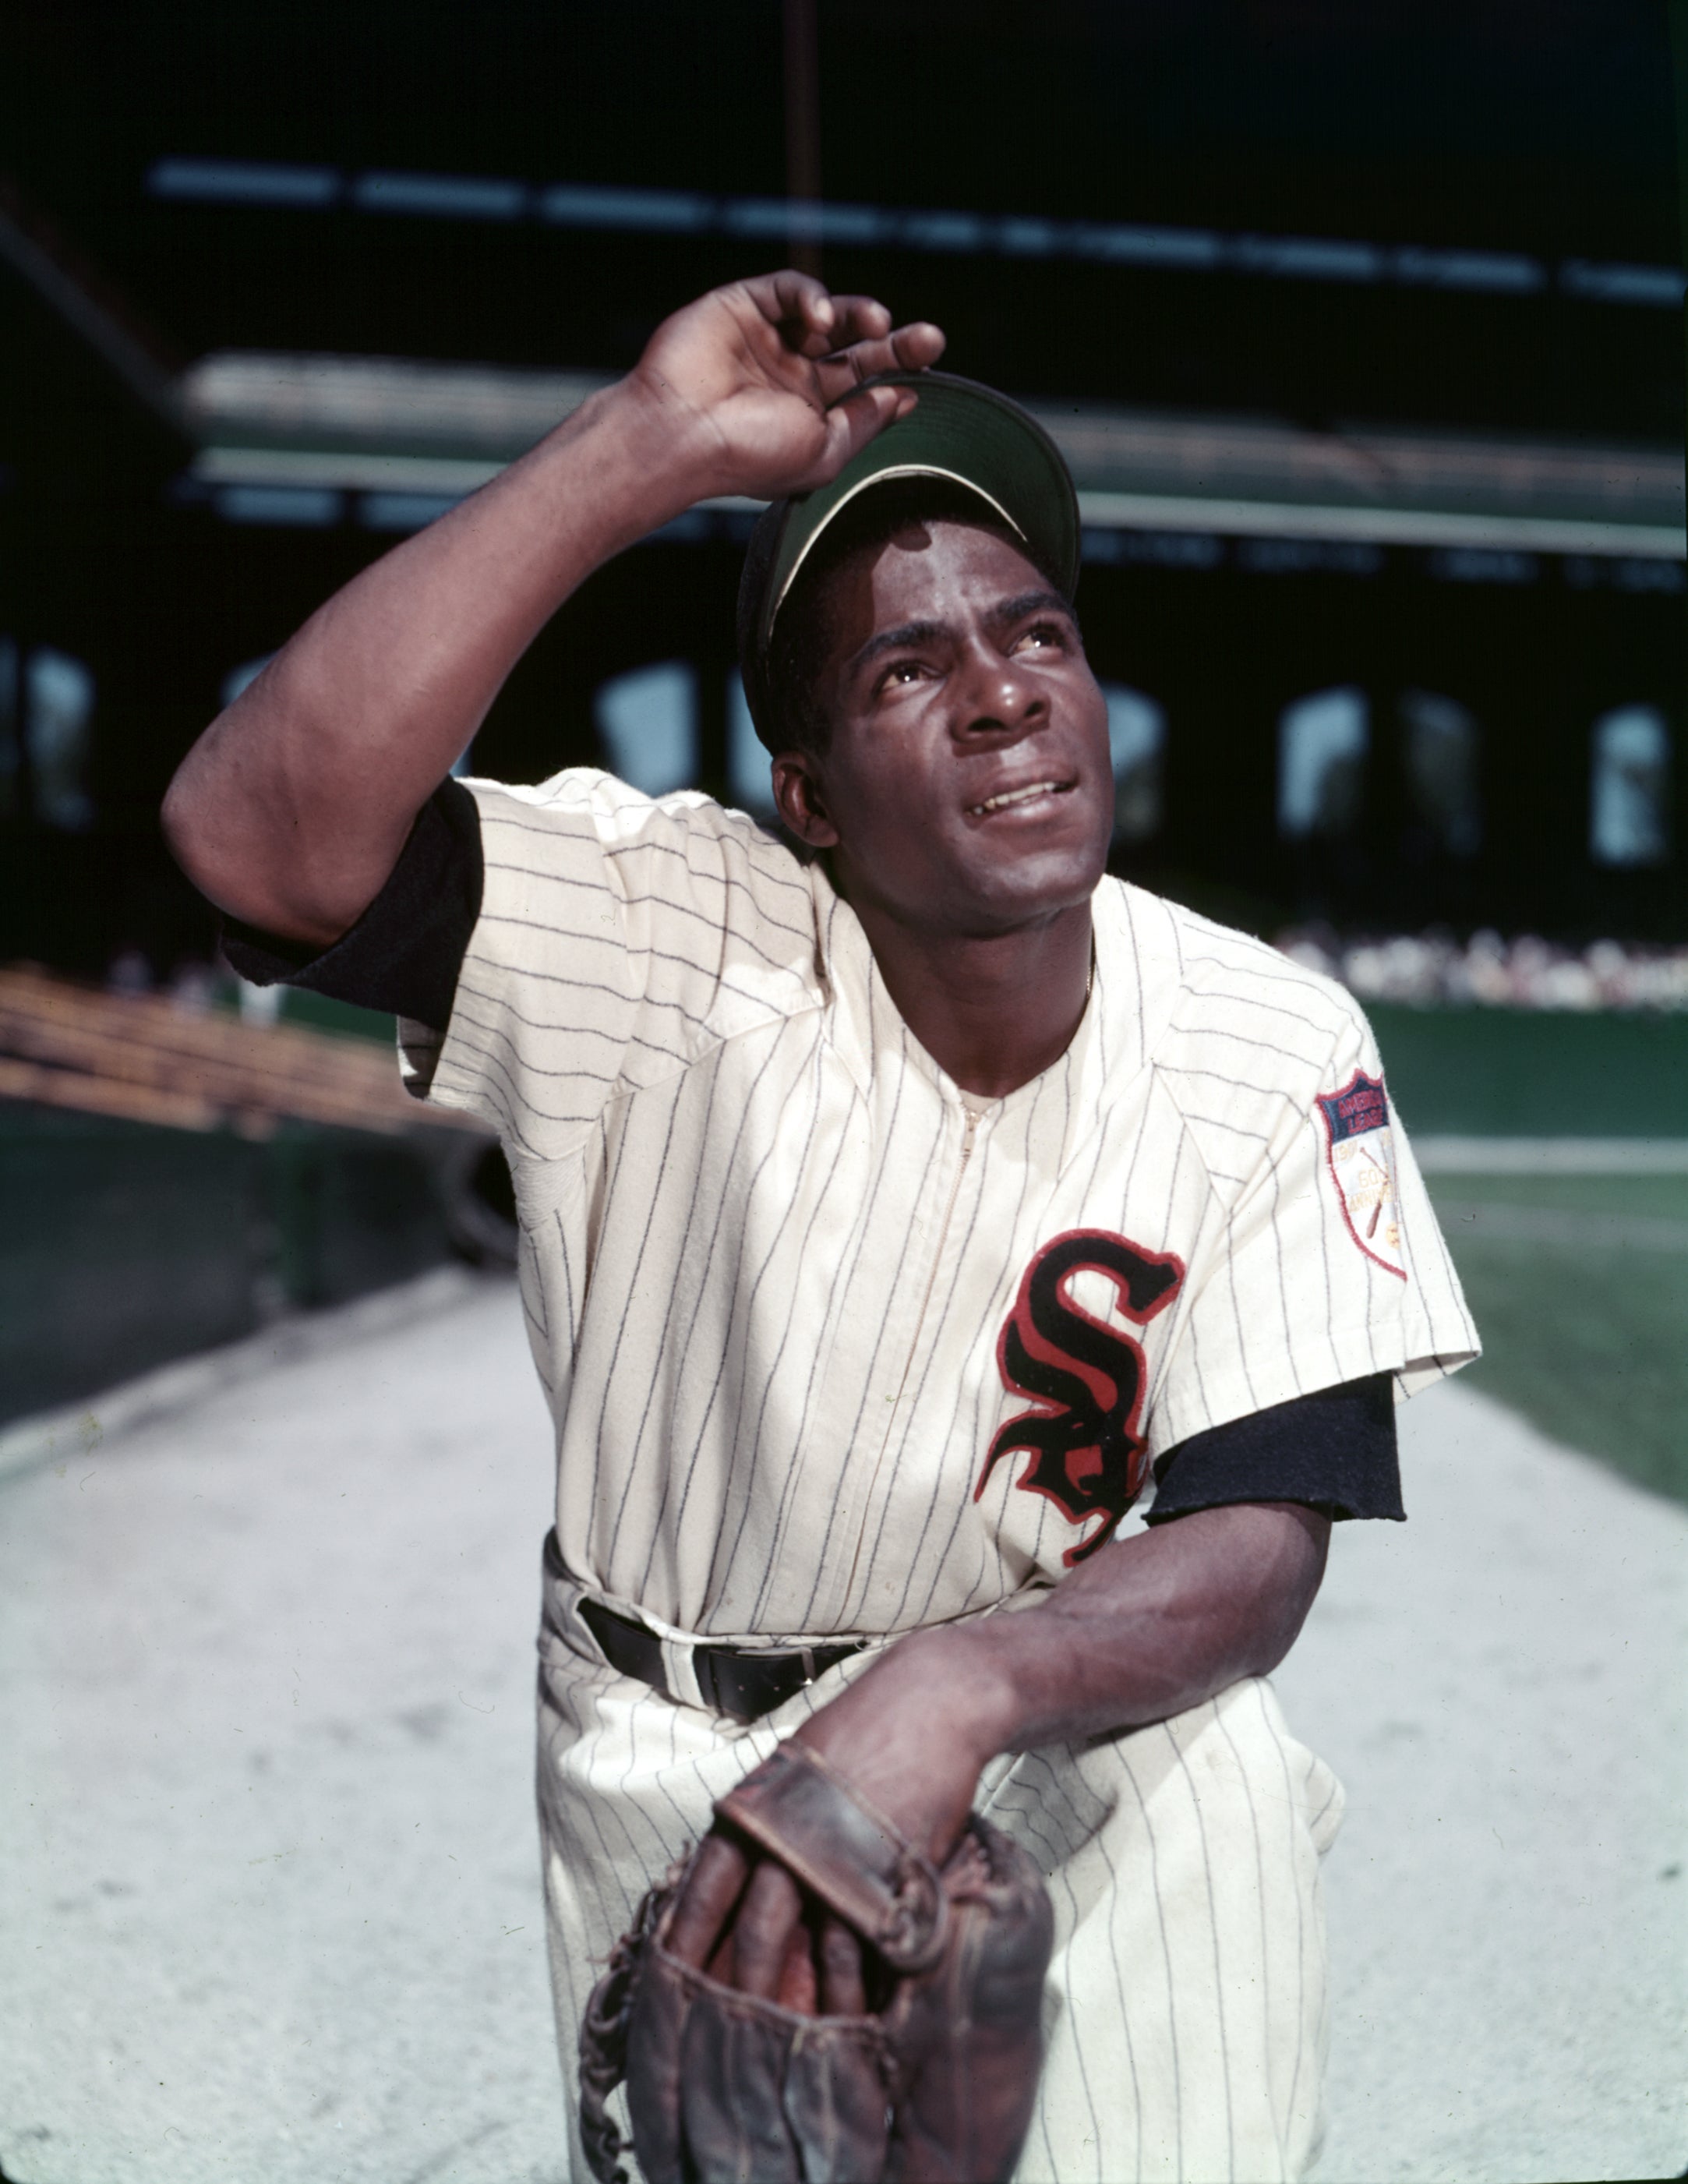 Minnie Minoso’s talent and courage opened doors for Latin American stars